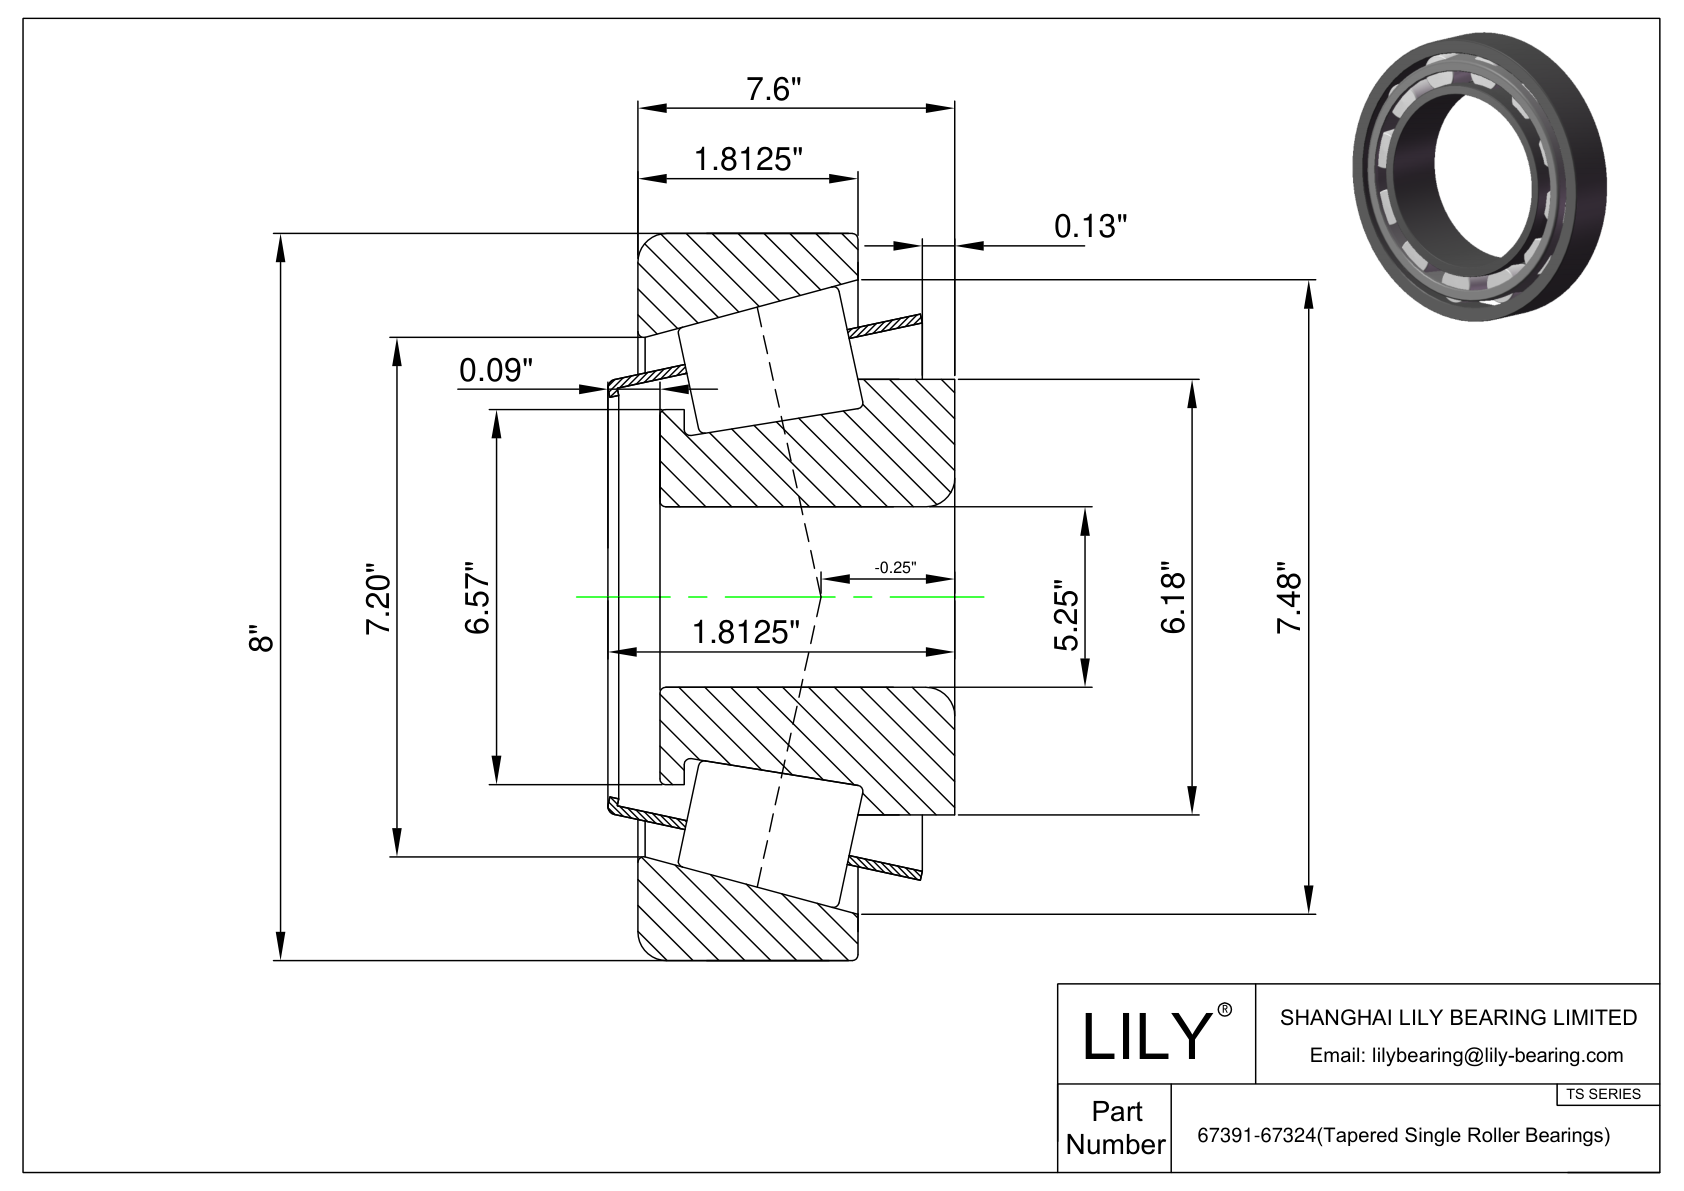 67391-67324 TS (Tapered Single Roller Bearings) (Imperial) cad drawing